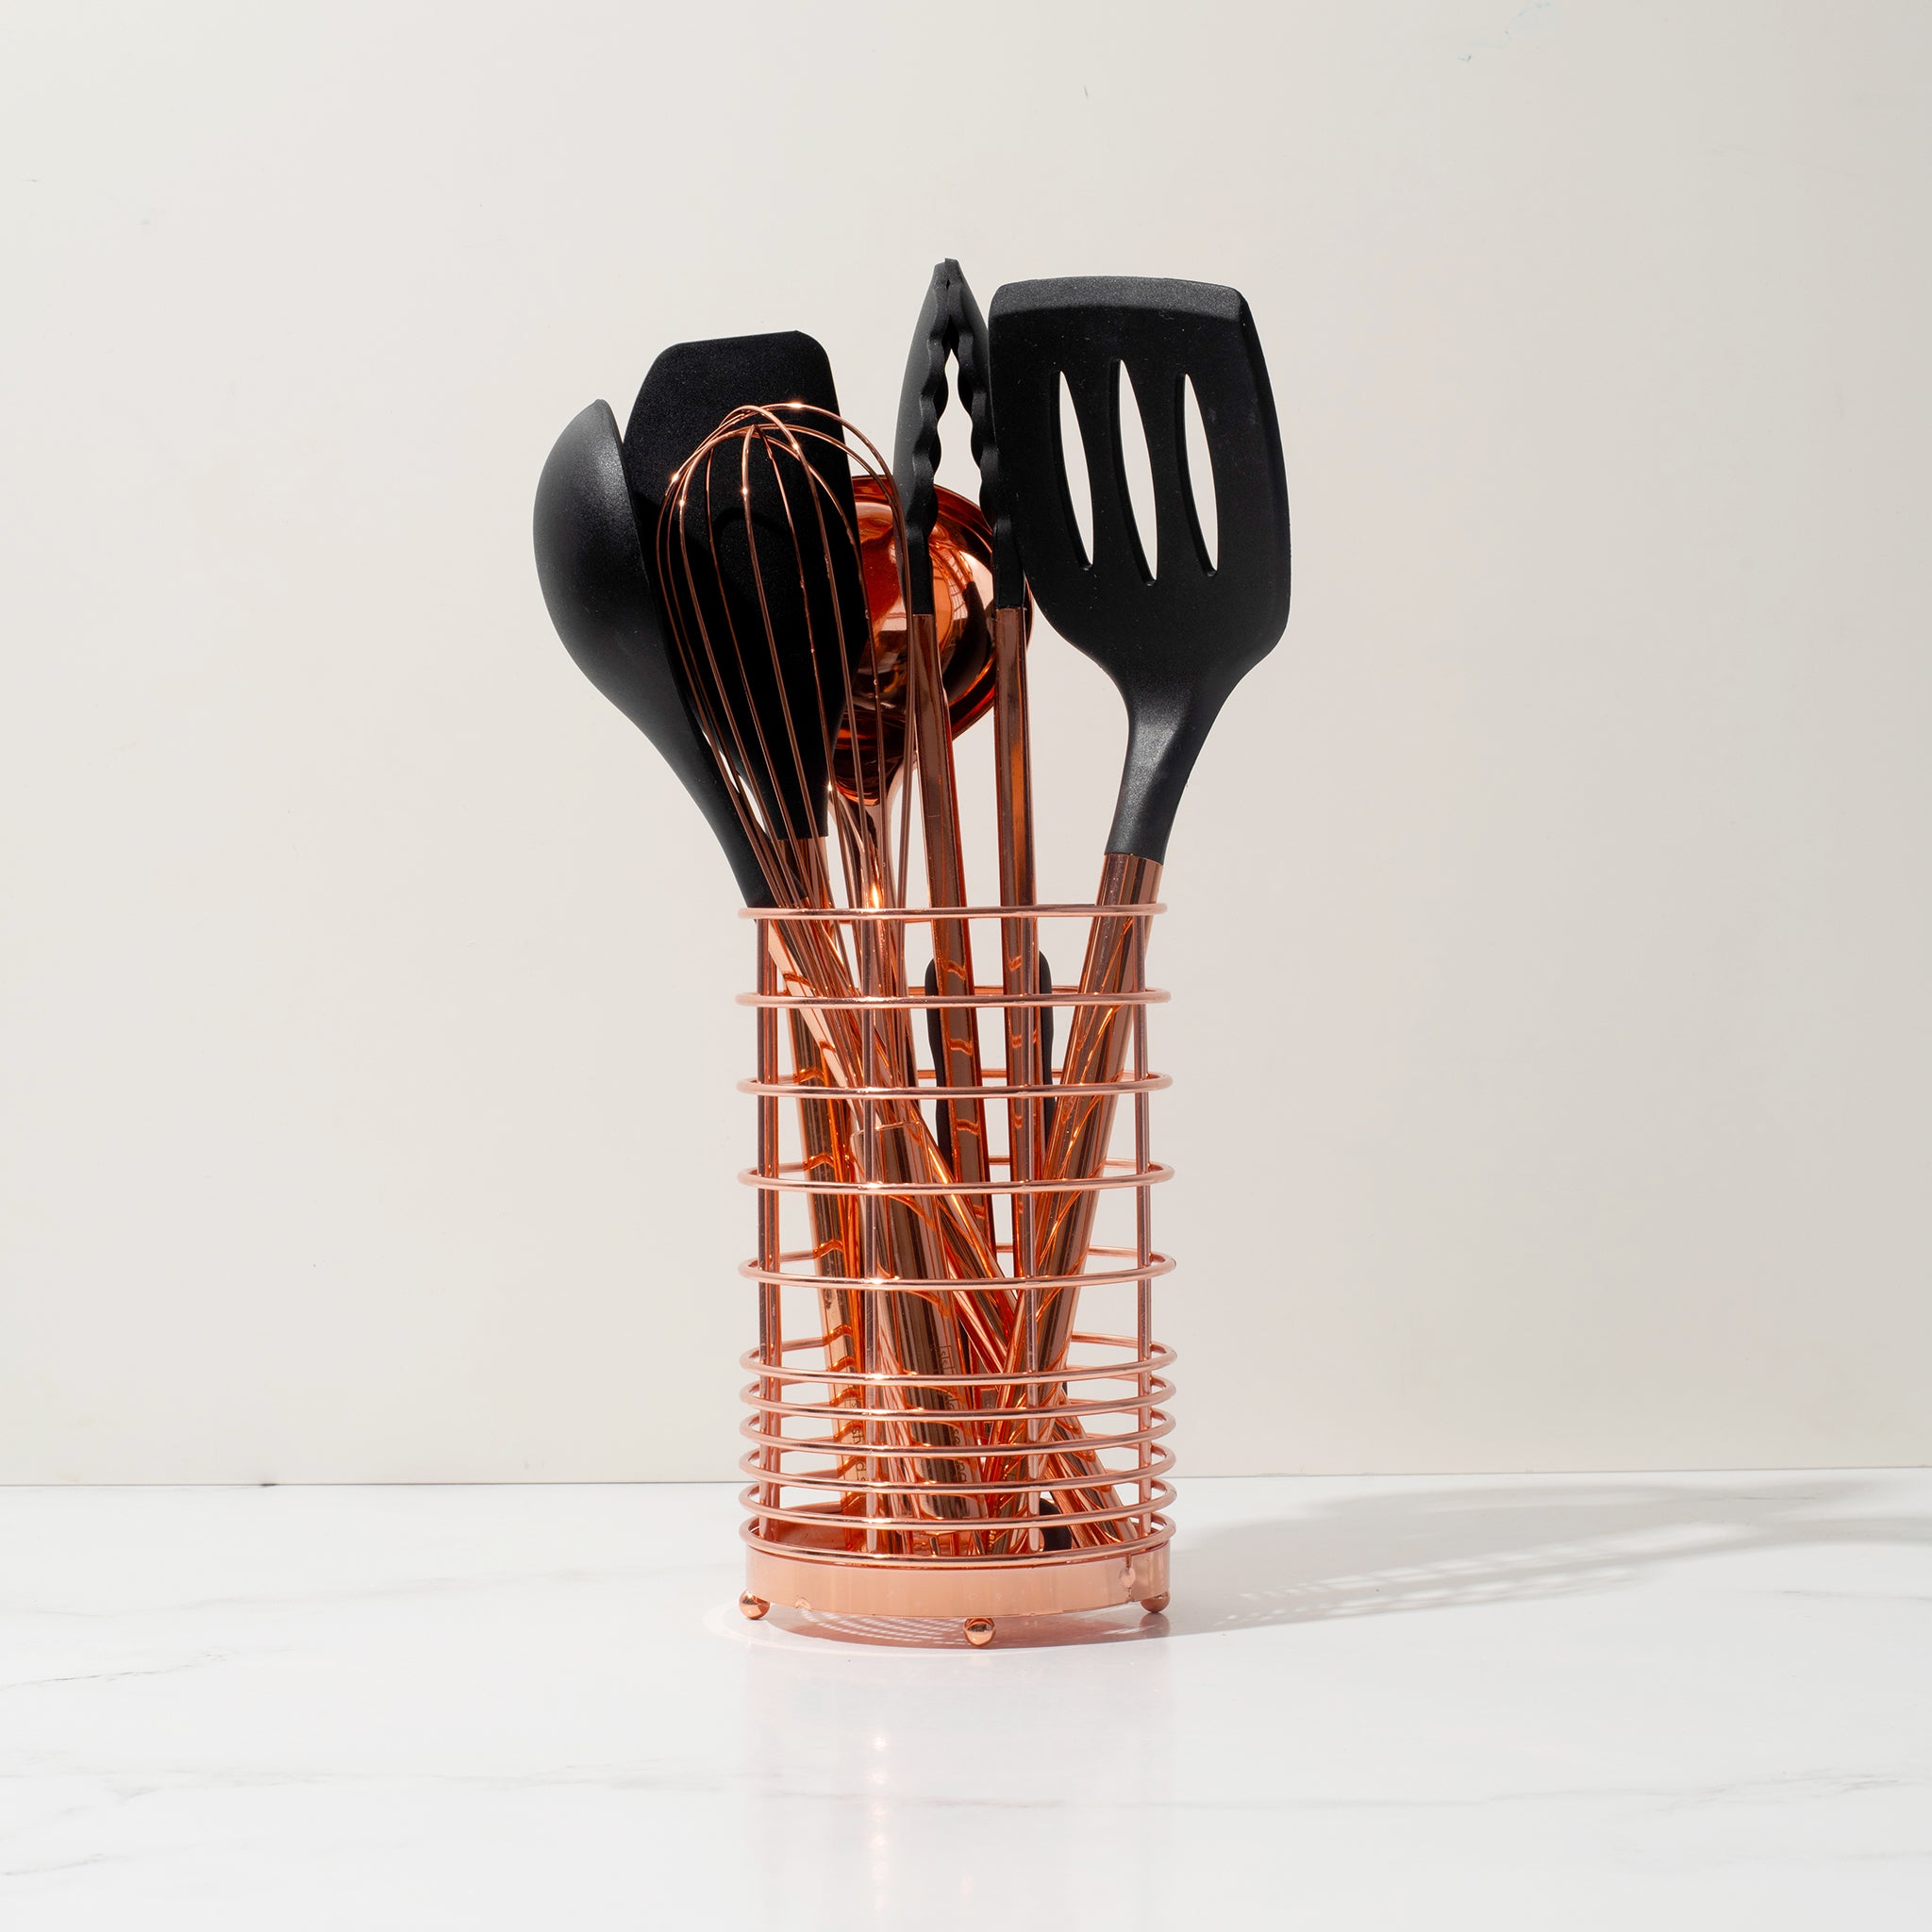 Black & Copper Kitchen Utensils with Copper Utensil Holder- 17PC Set:  Measuring Cups and Spoons, Rose Gold Kitchen Utensils Set - Black and  Copper